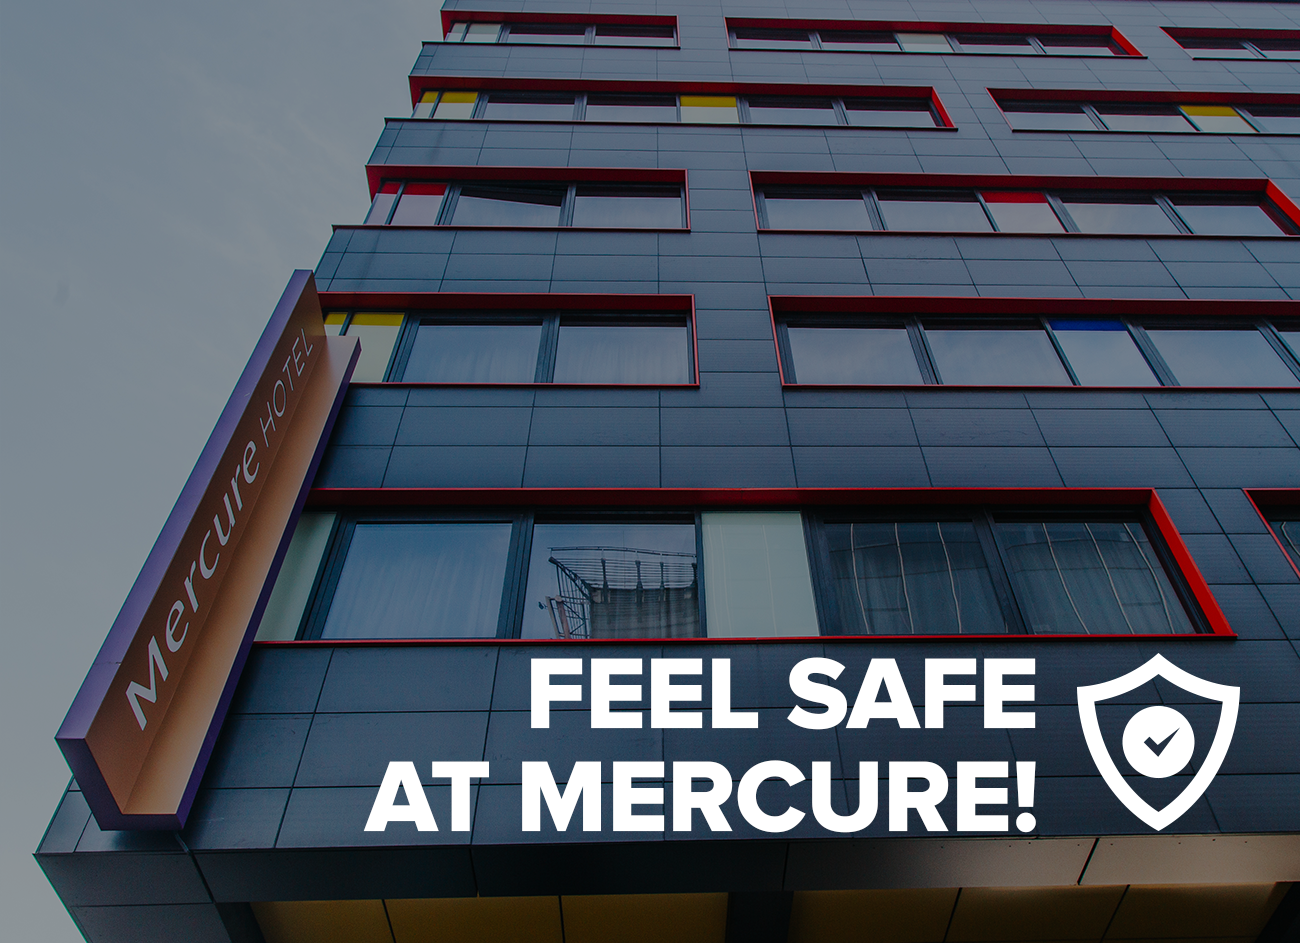 You're safe at Mercure